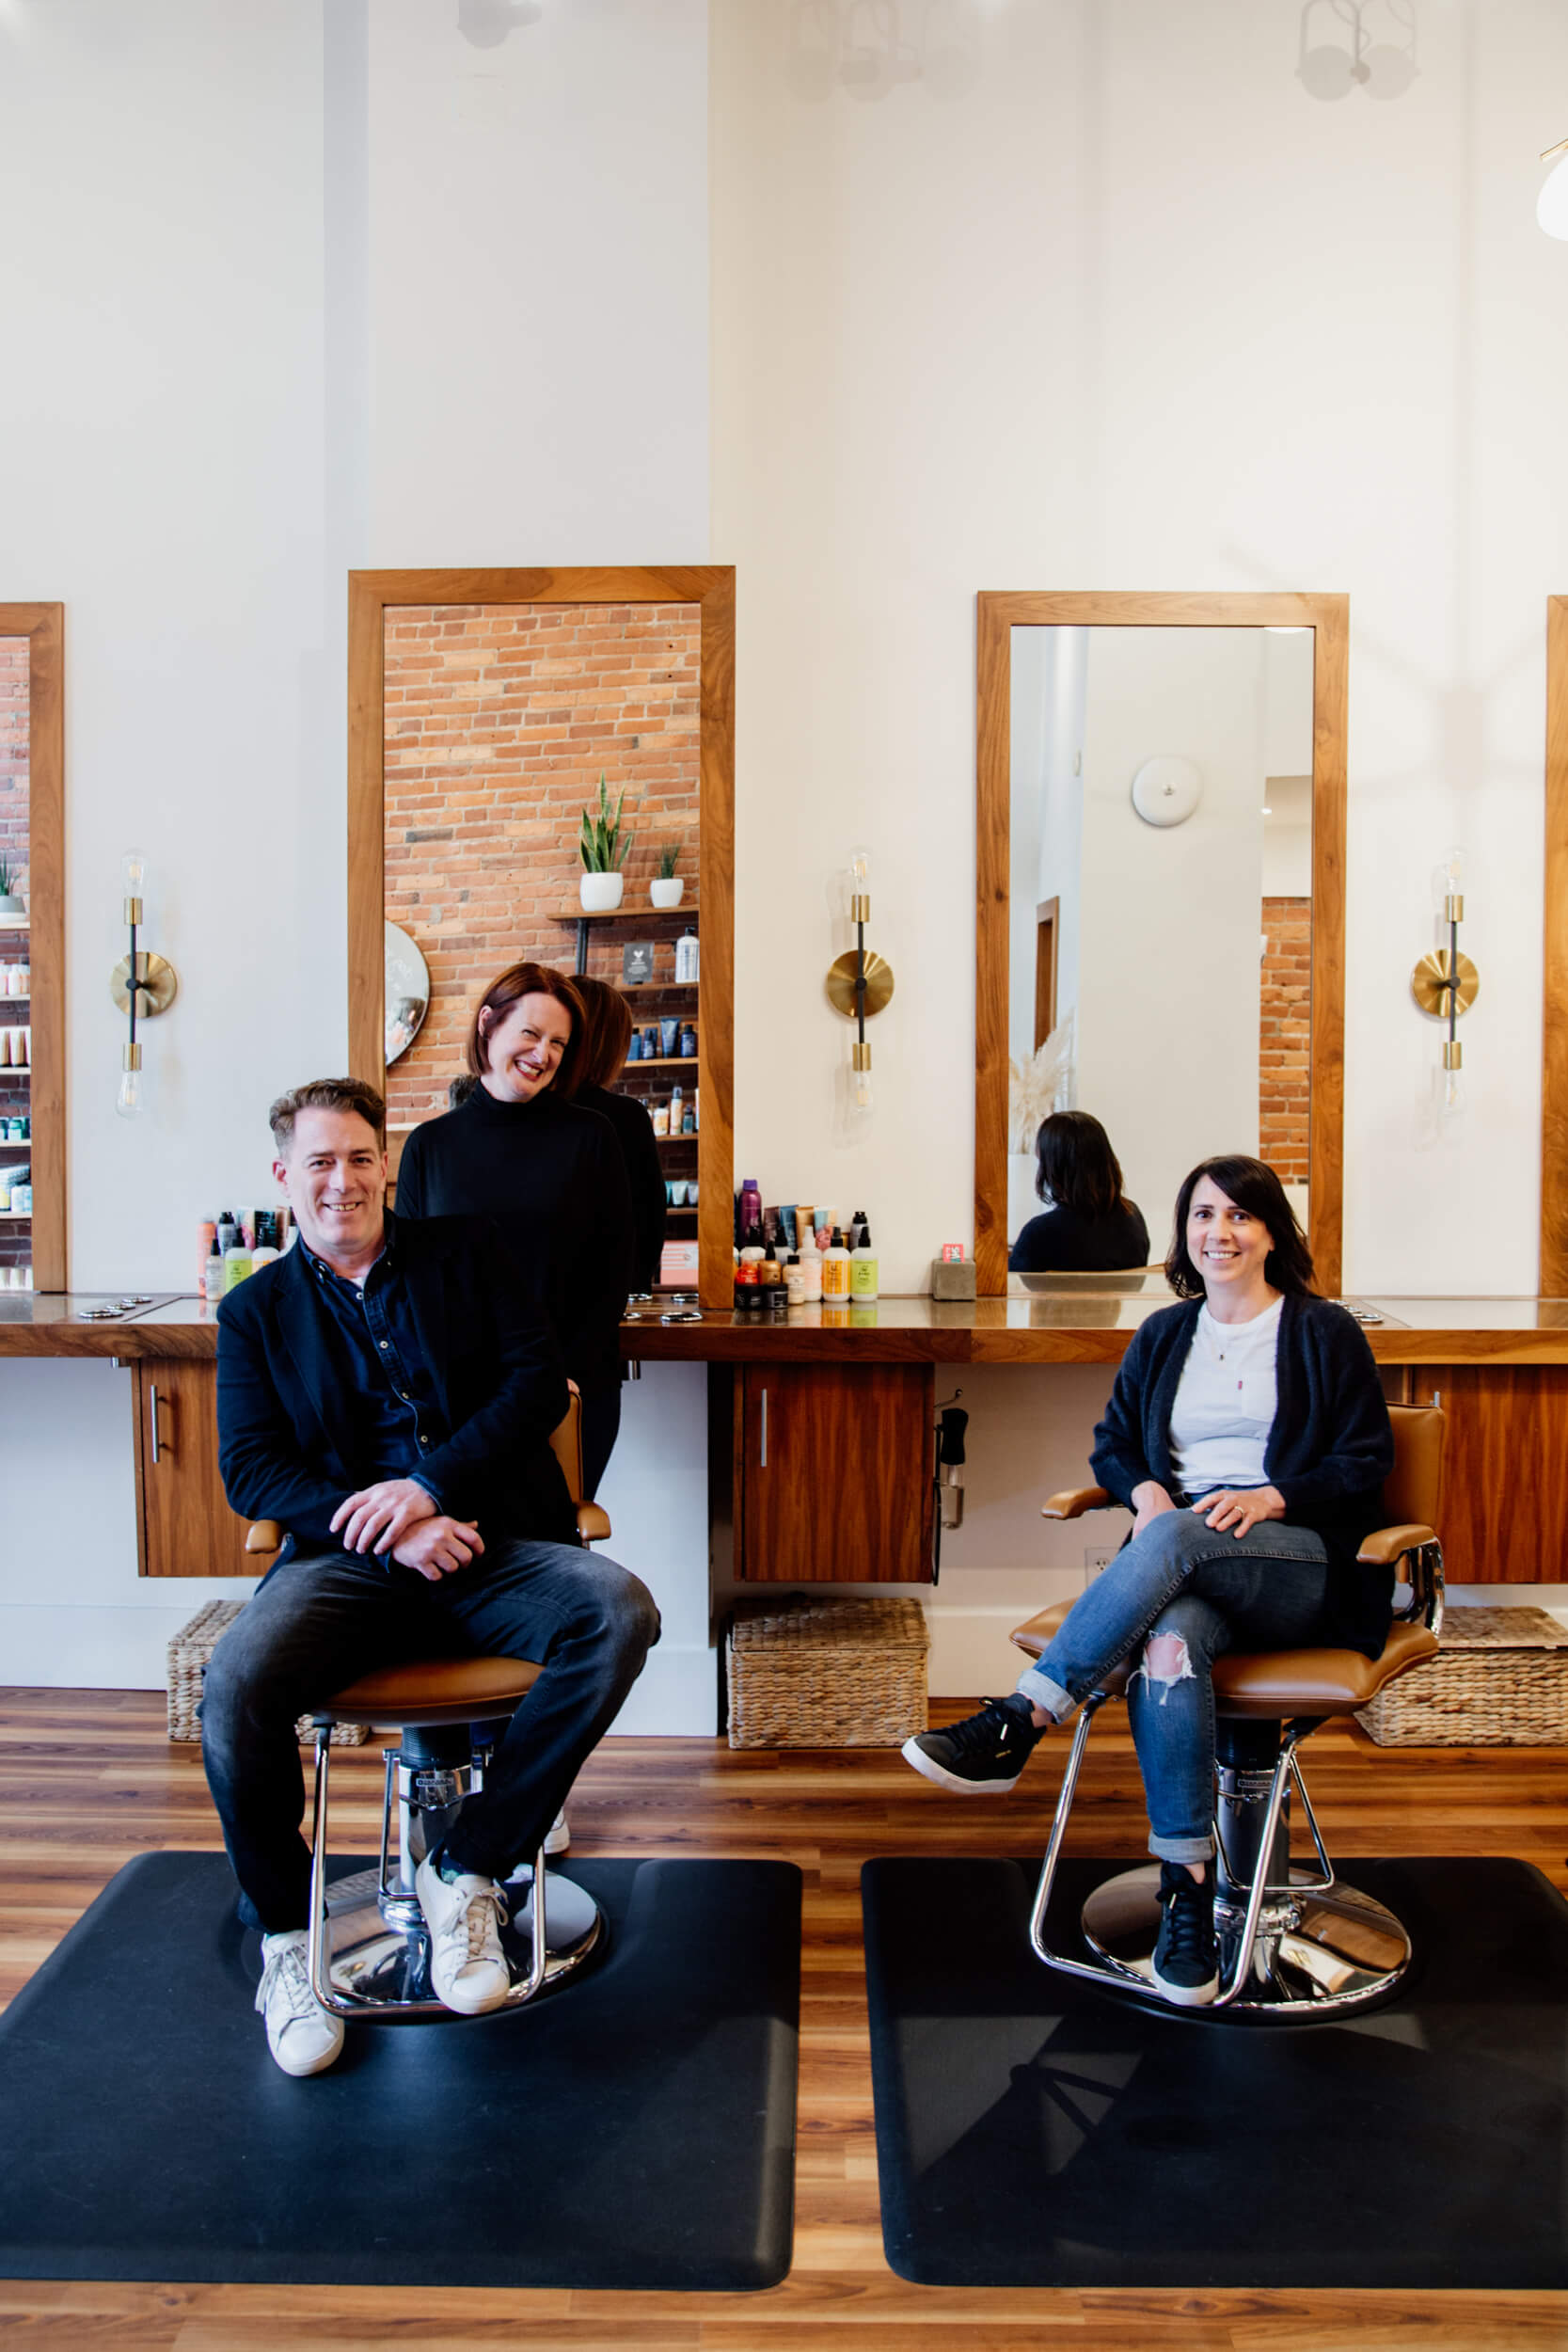 Three salon owners smile at camera while sitting on chairs.